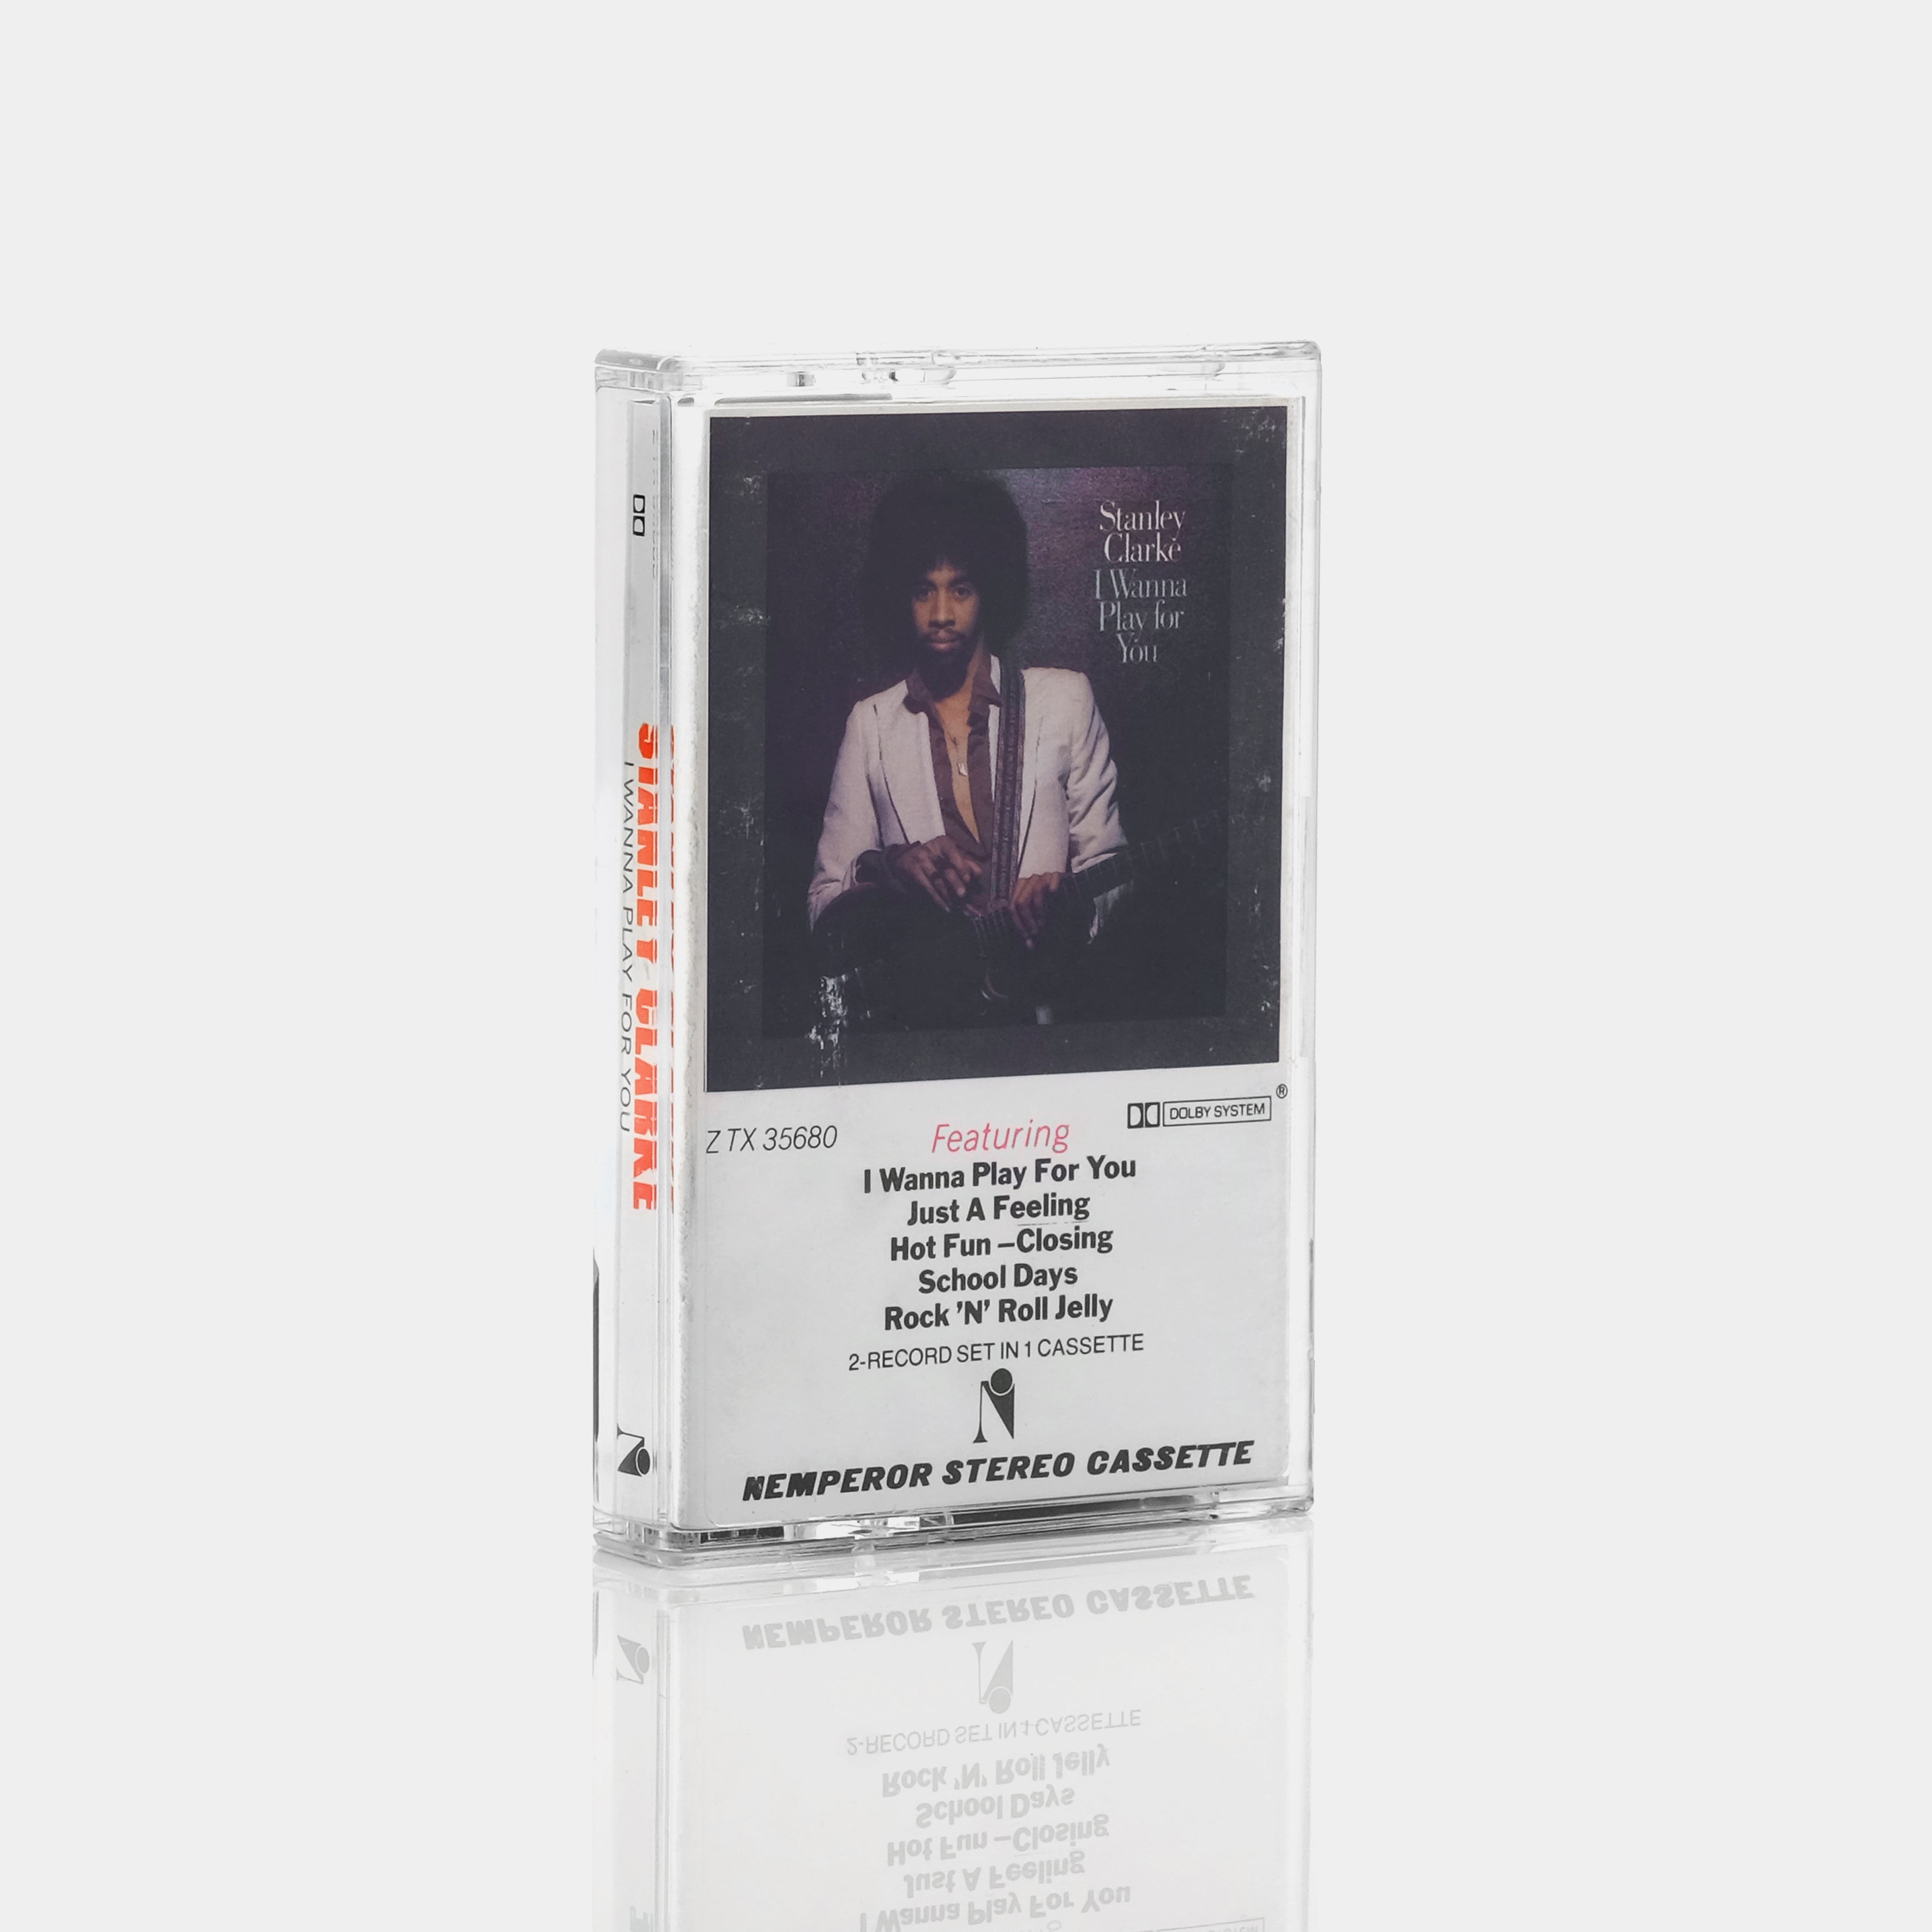 Stanley Clarke - I Wanna Play For You Cassette Tape